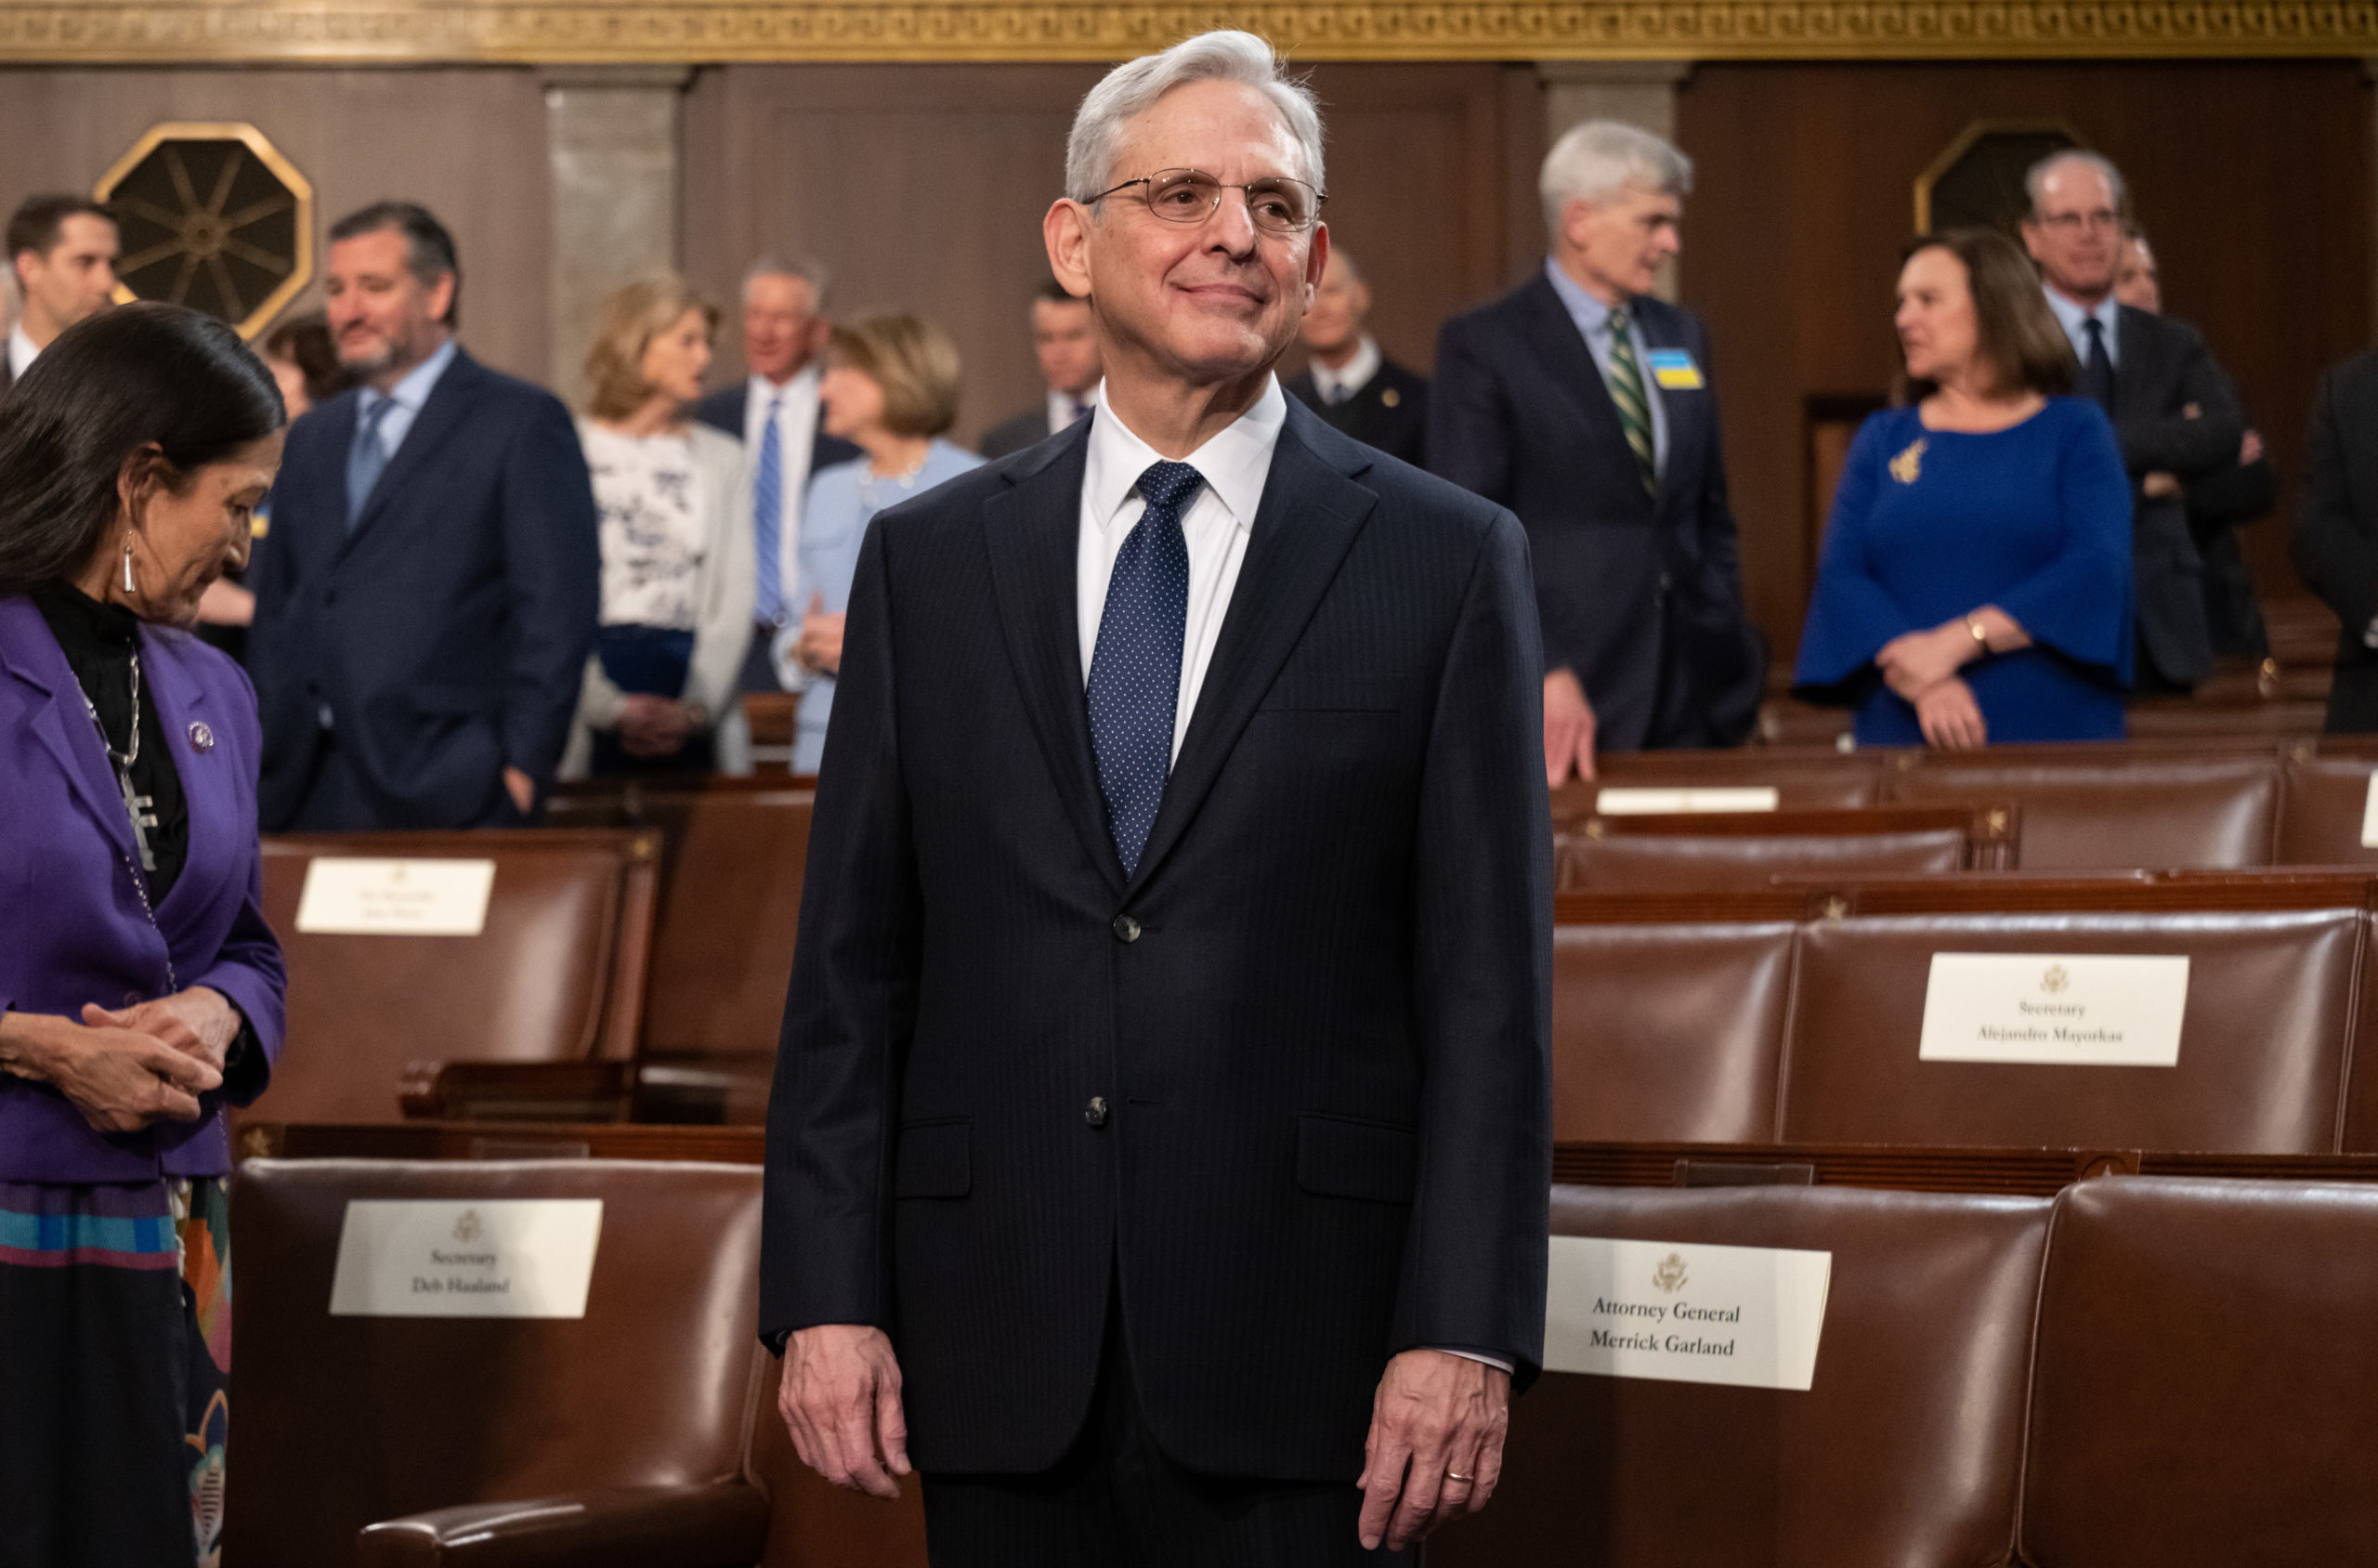 Attorney General Merrick Garland attends President Joe Biden's State of the Union address Tuesday. The Department of Justice announced the creation of Task Force KleptoCapture on Wednesday, to enforce Russian sanctions. (Saul Loeb/Pool/Getty Images)